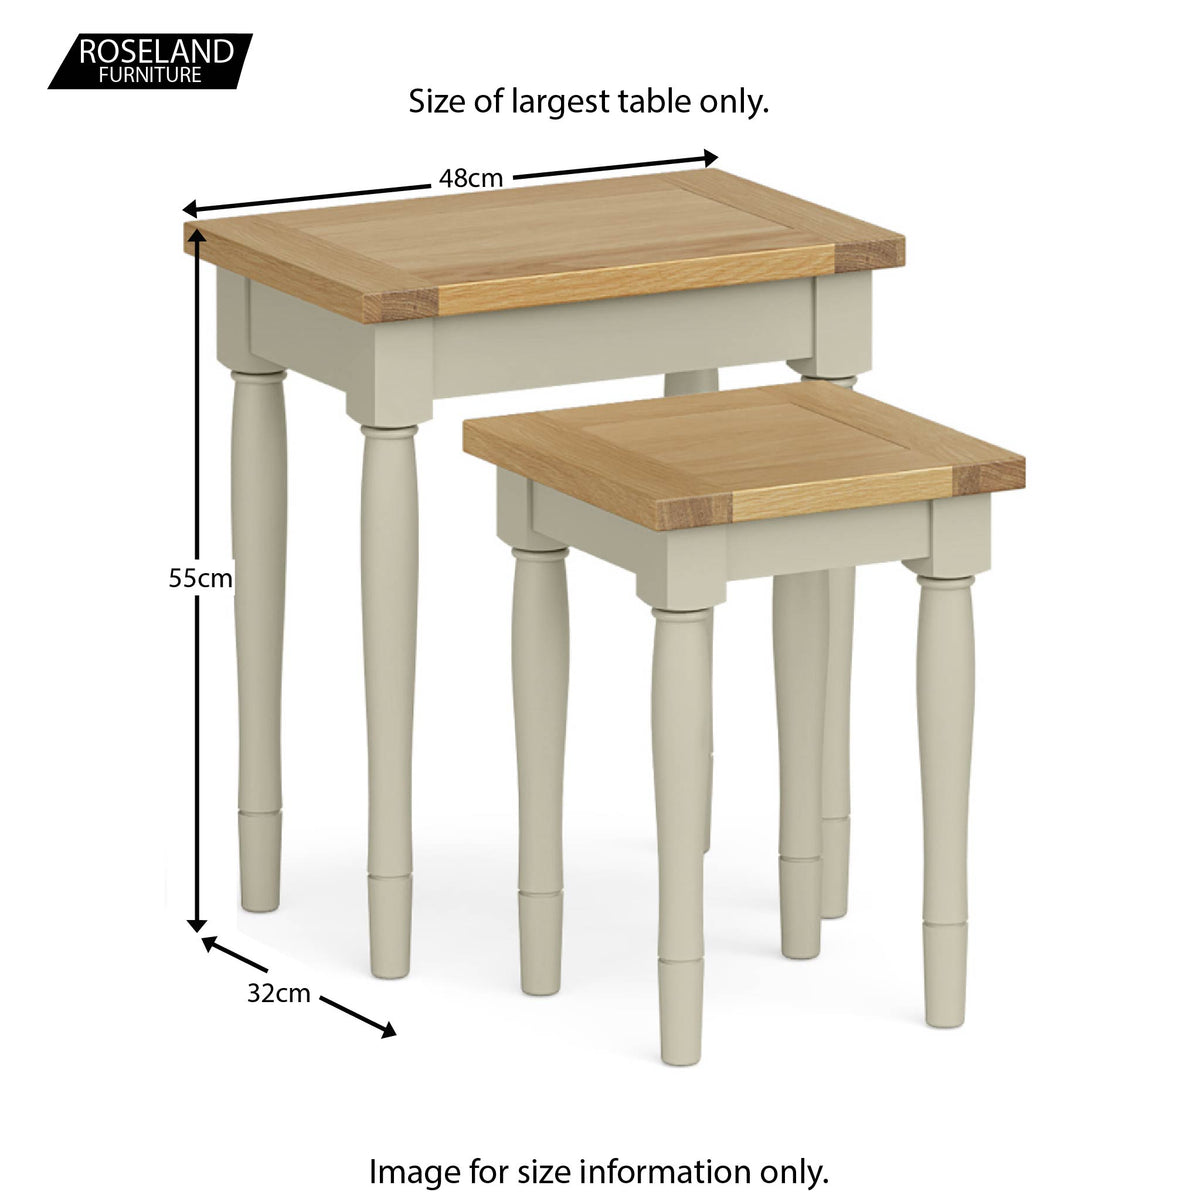 Chichester Ledum Green Nest of Tables - Size Guide